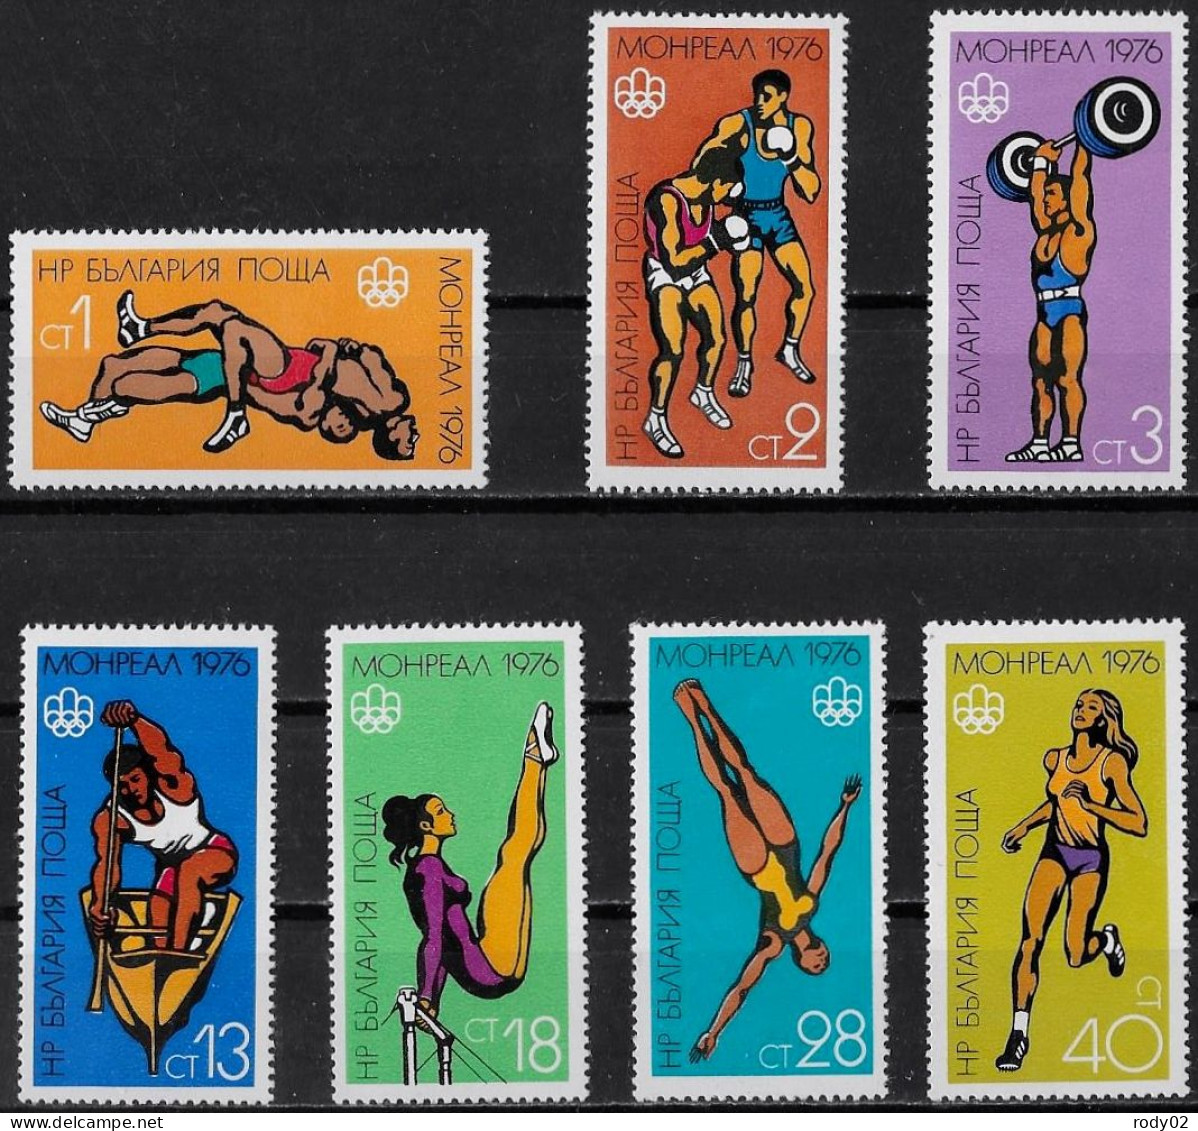 BULGARIE - JEUX OLYMPIQUES DE MONTREAL EN 1976 - N° 2215 A 2221 - NEUF** MNH - Zomer 1976: Montreal